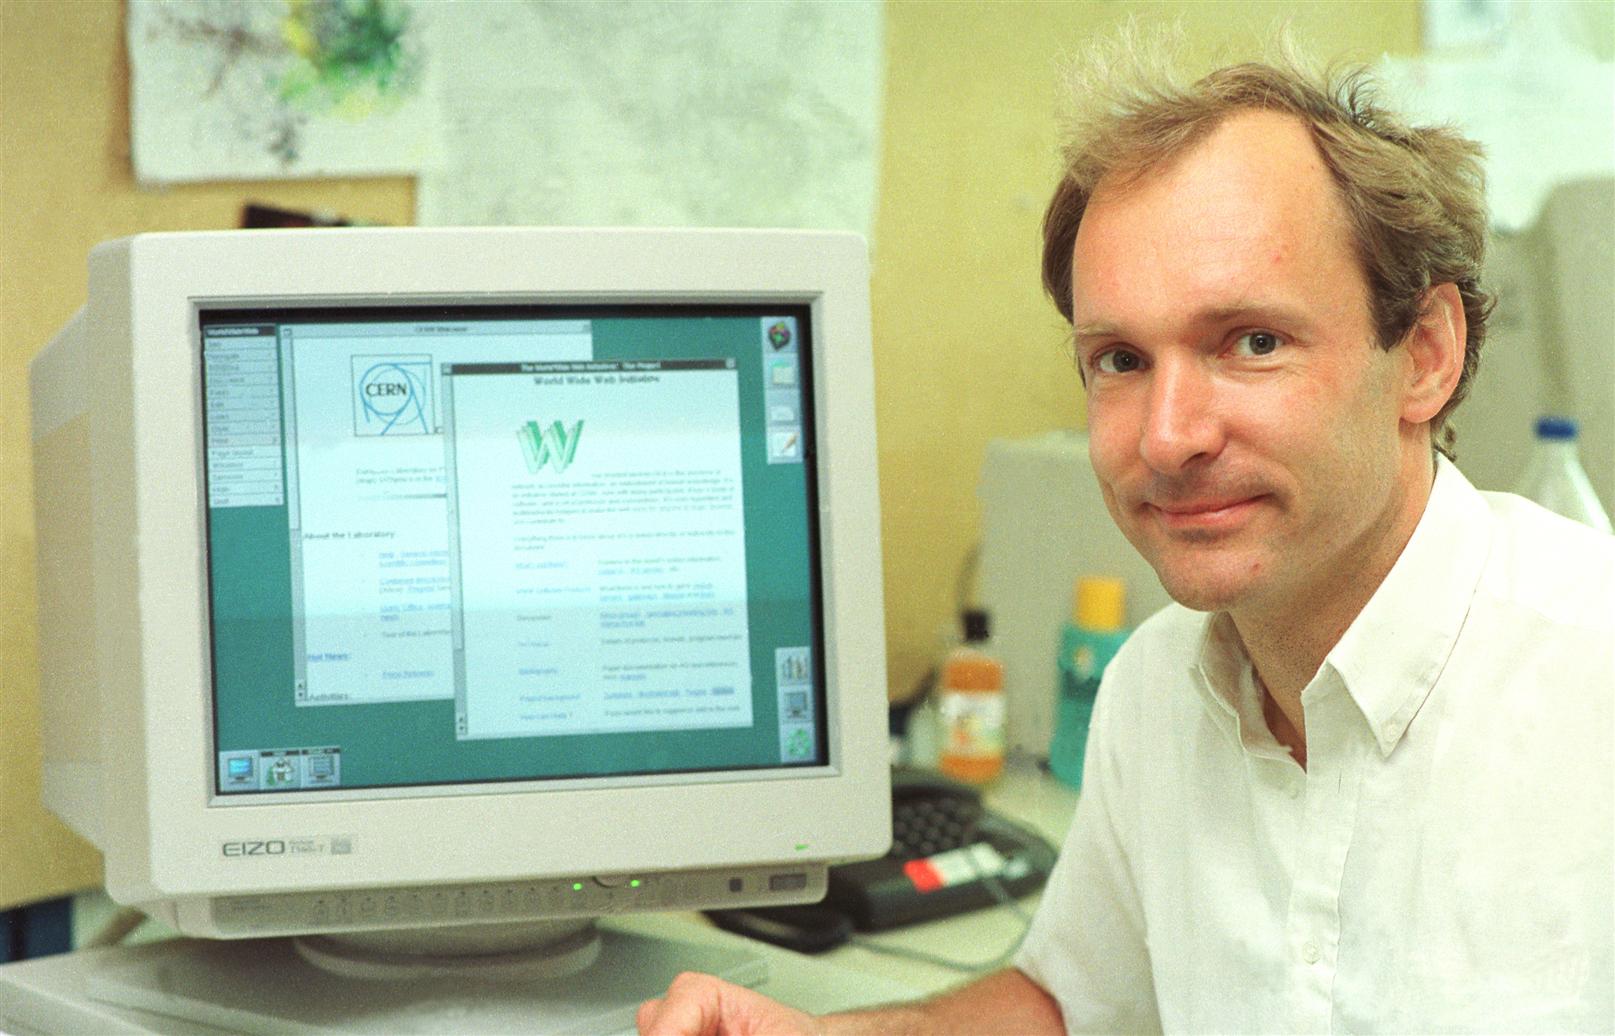 Former physicist Tim Berners-Lee invented the World-Wide Web